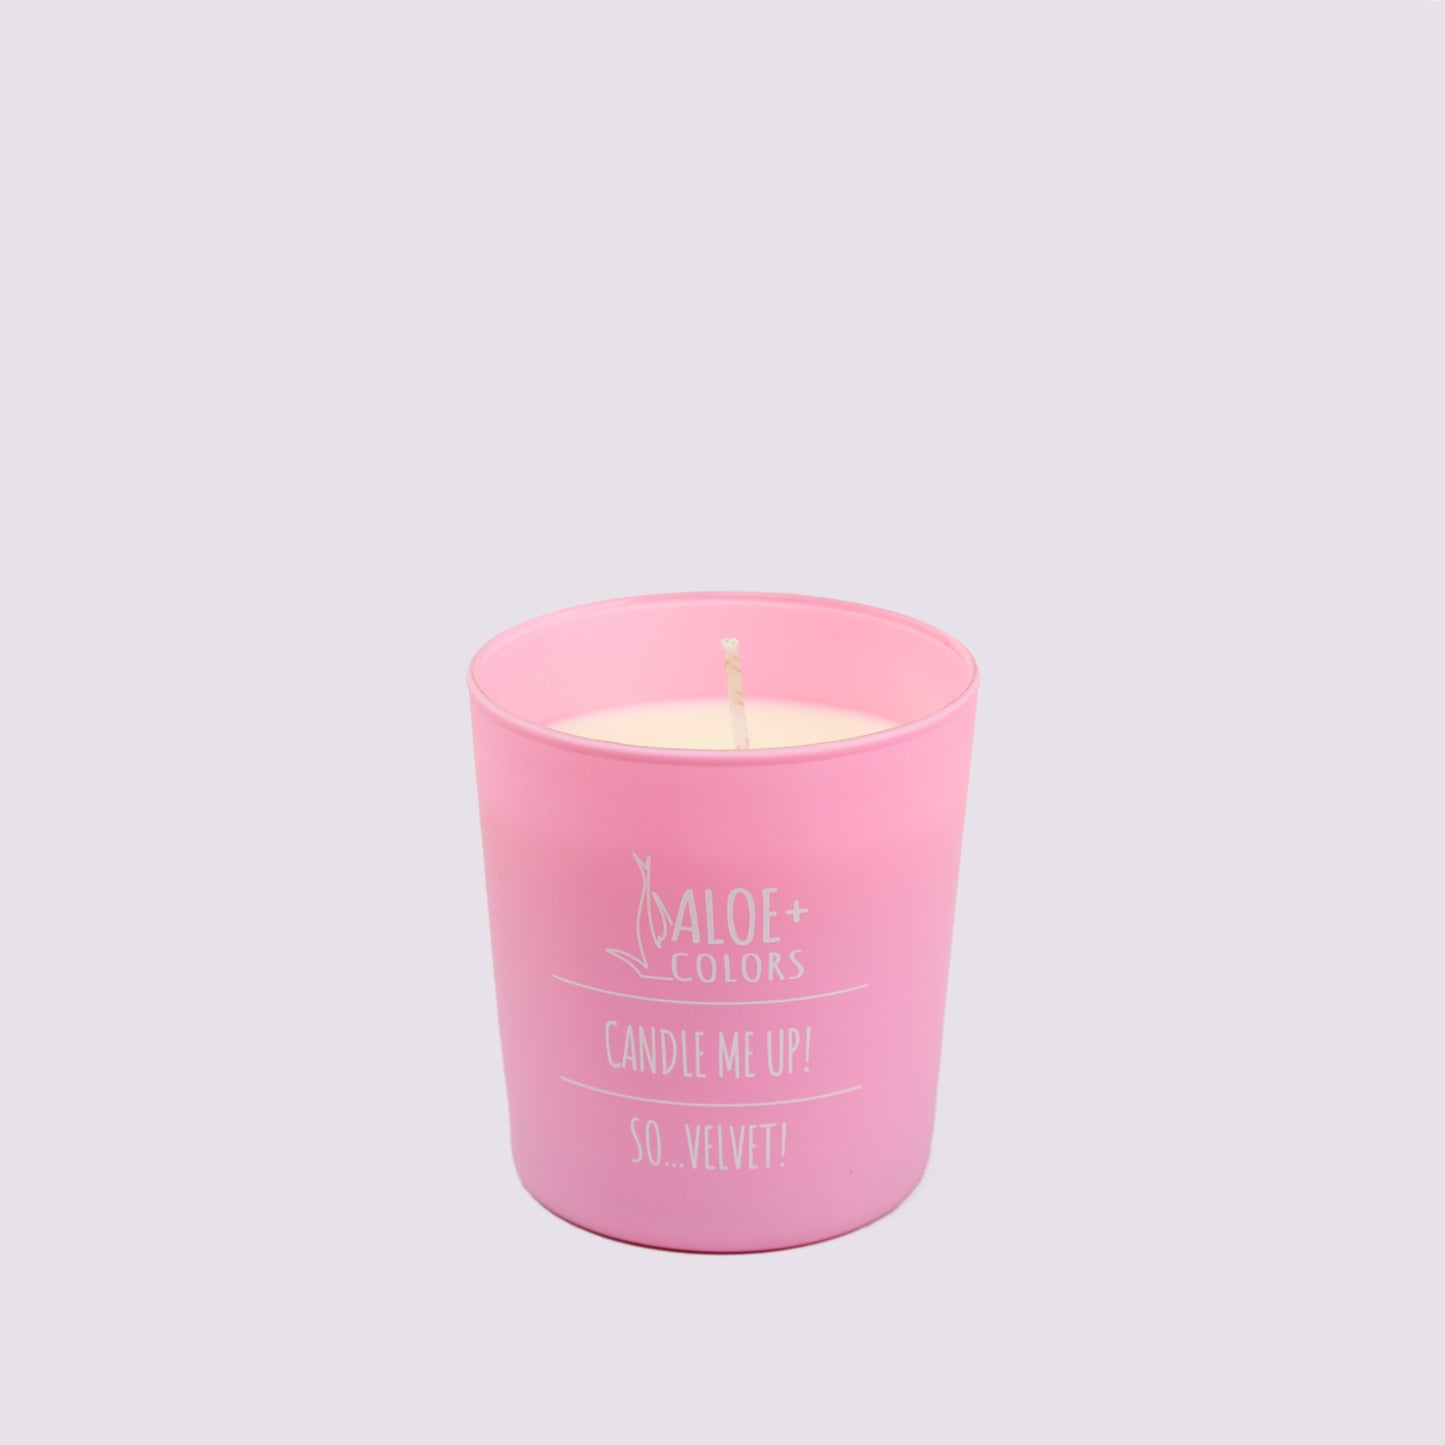 So Velvet! Scented Soy Candle